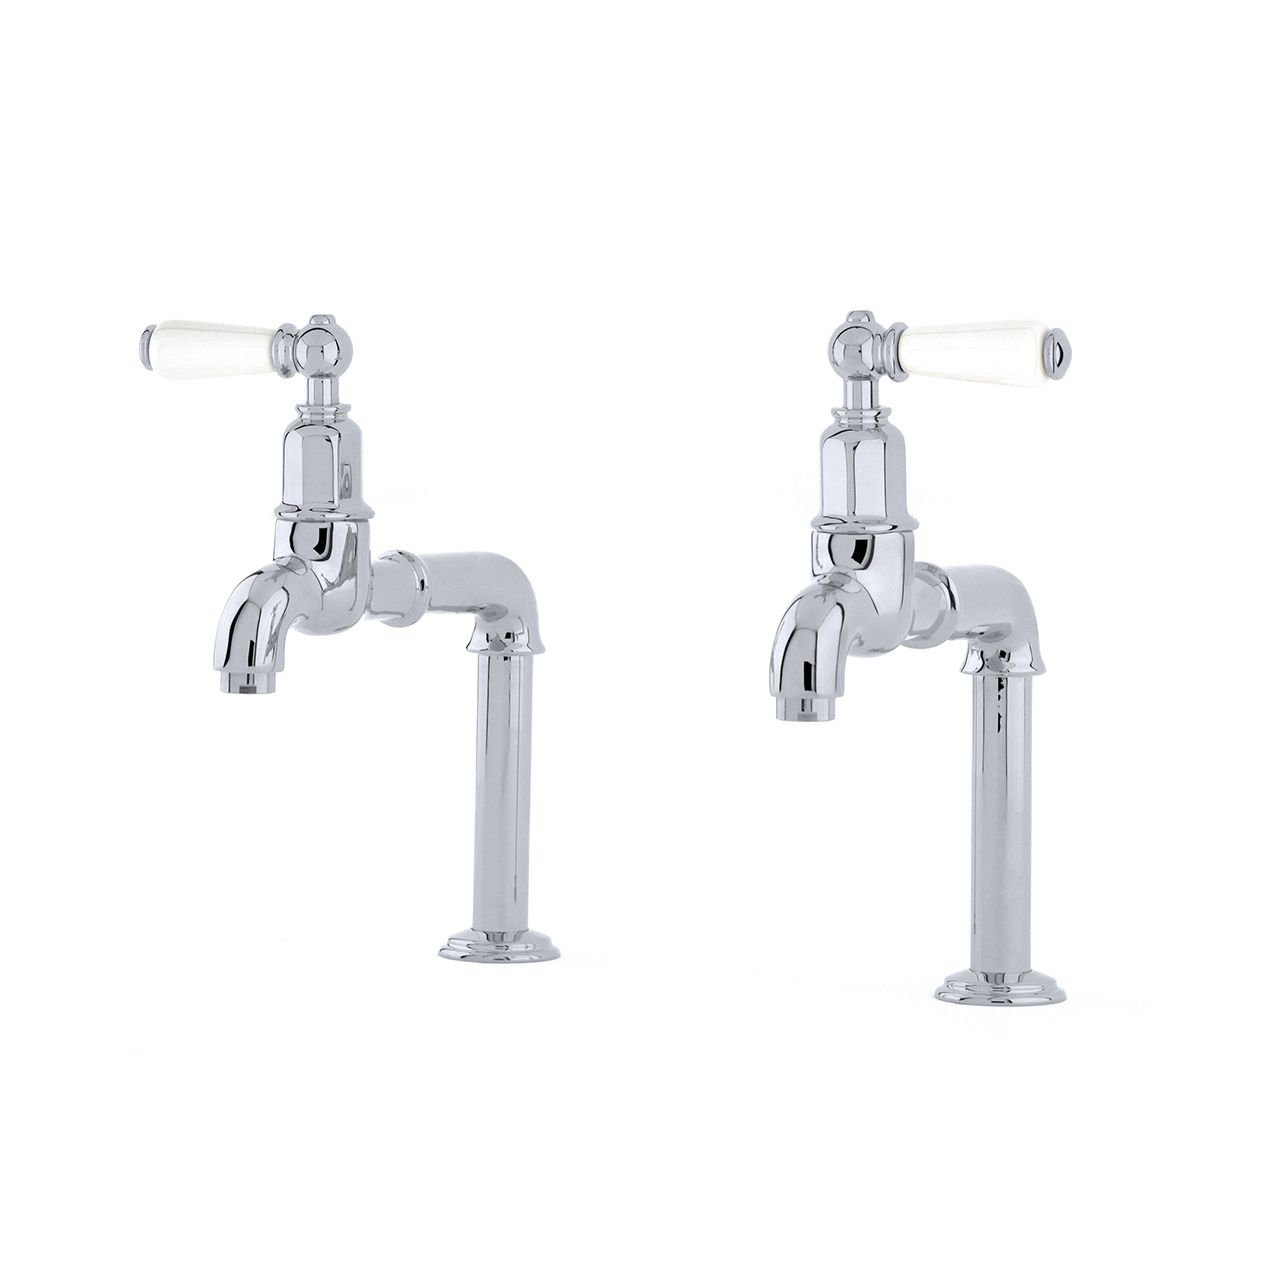 Ionian (were Mayan )Deck Mounted Bibcock taps with Porcelain Levers in Chrome – Perrin & Rowe